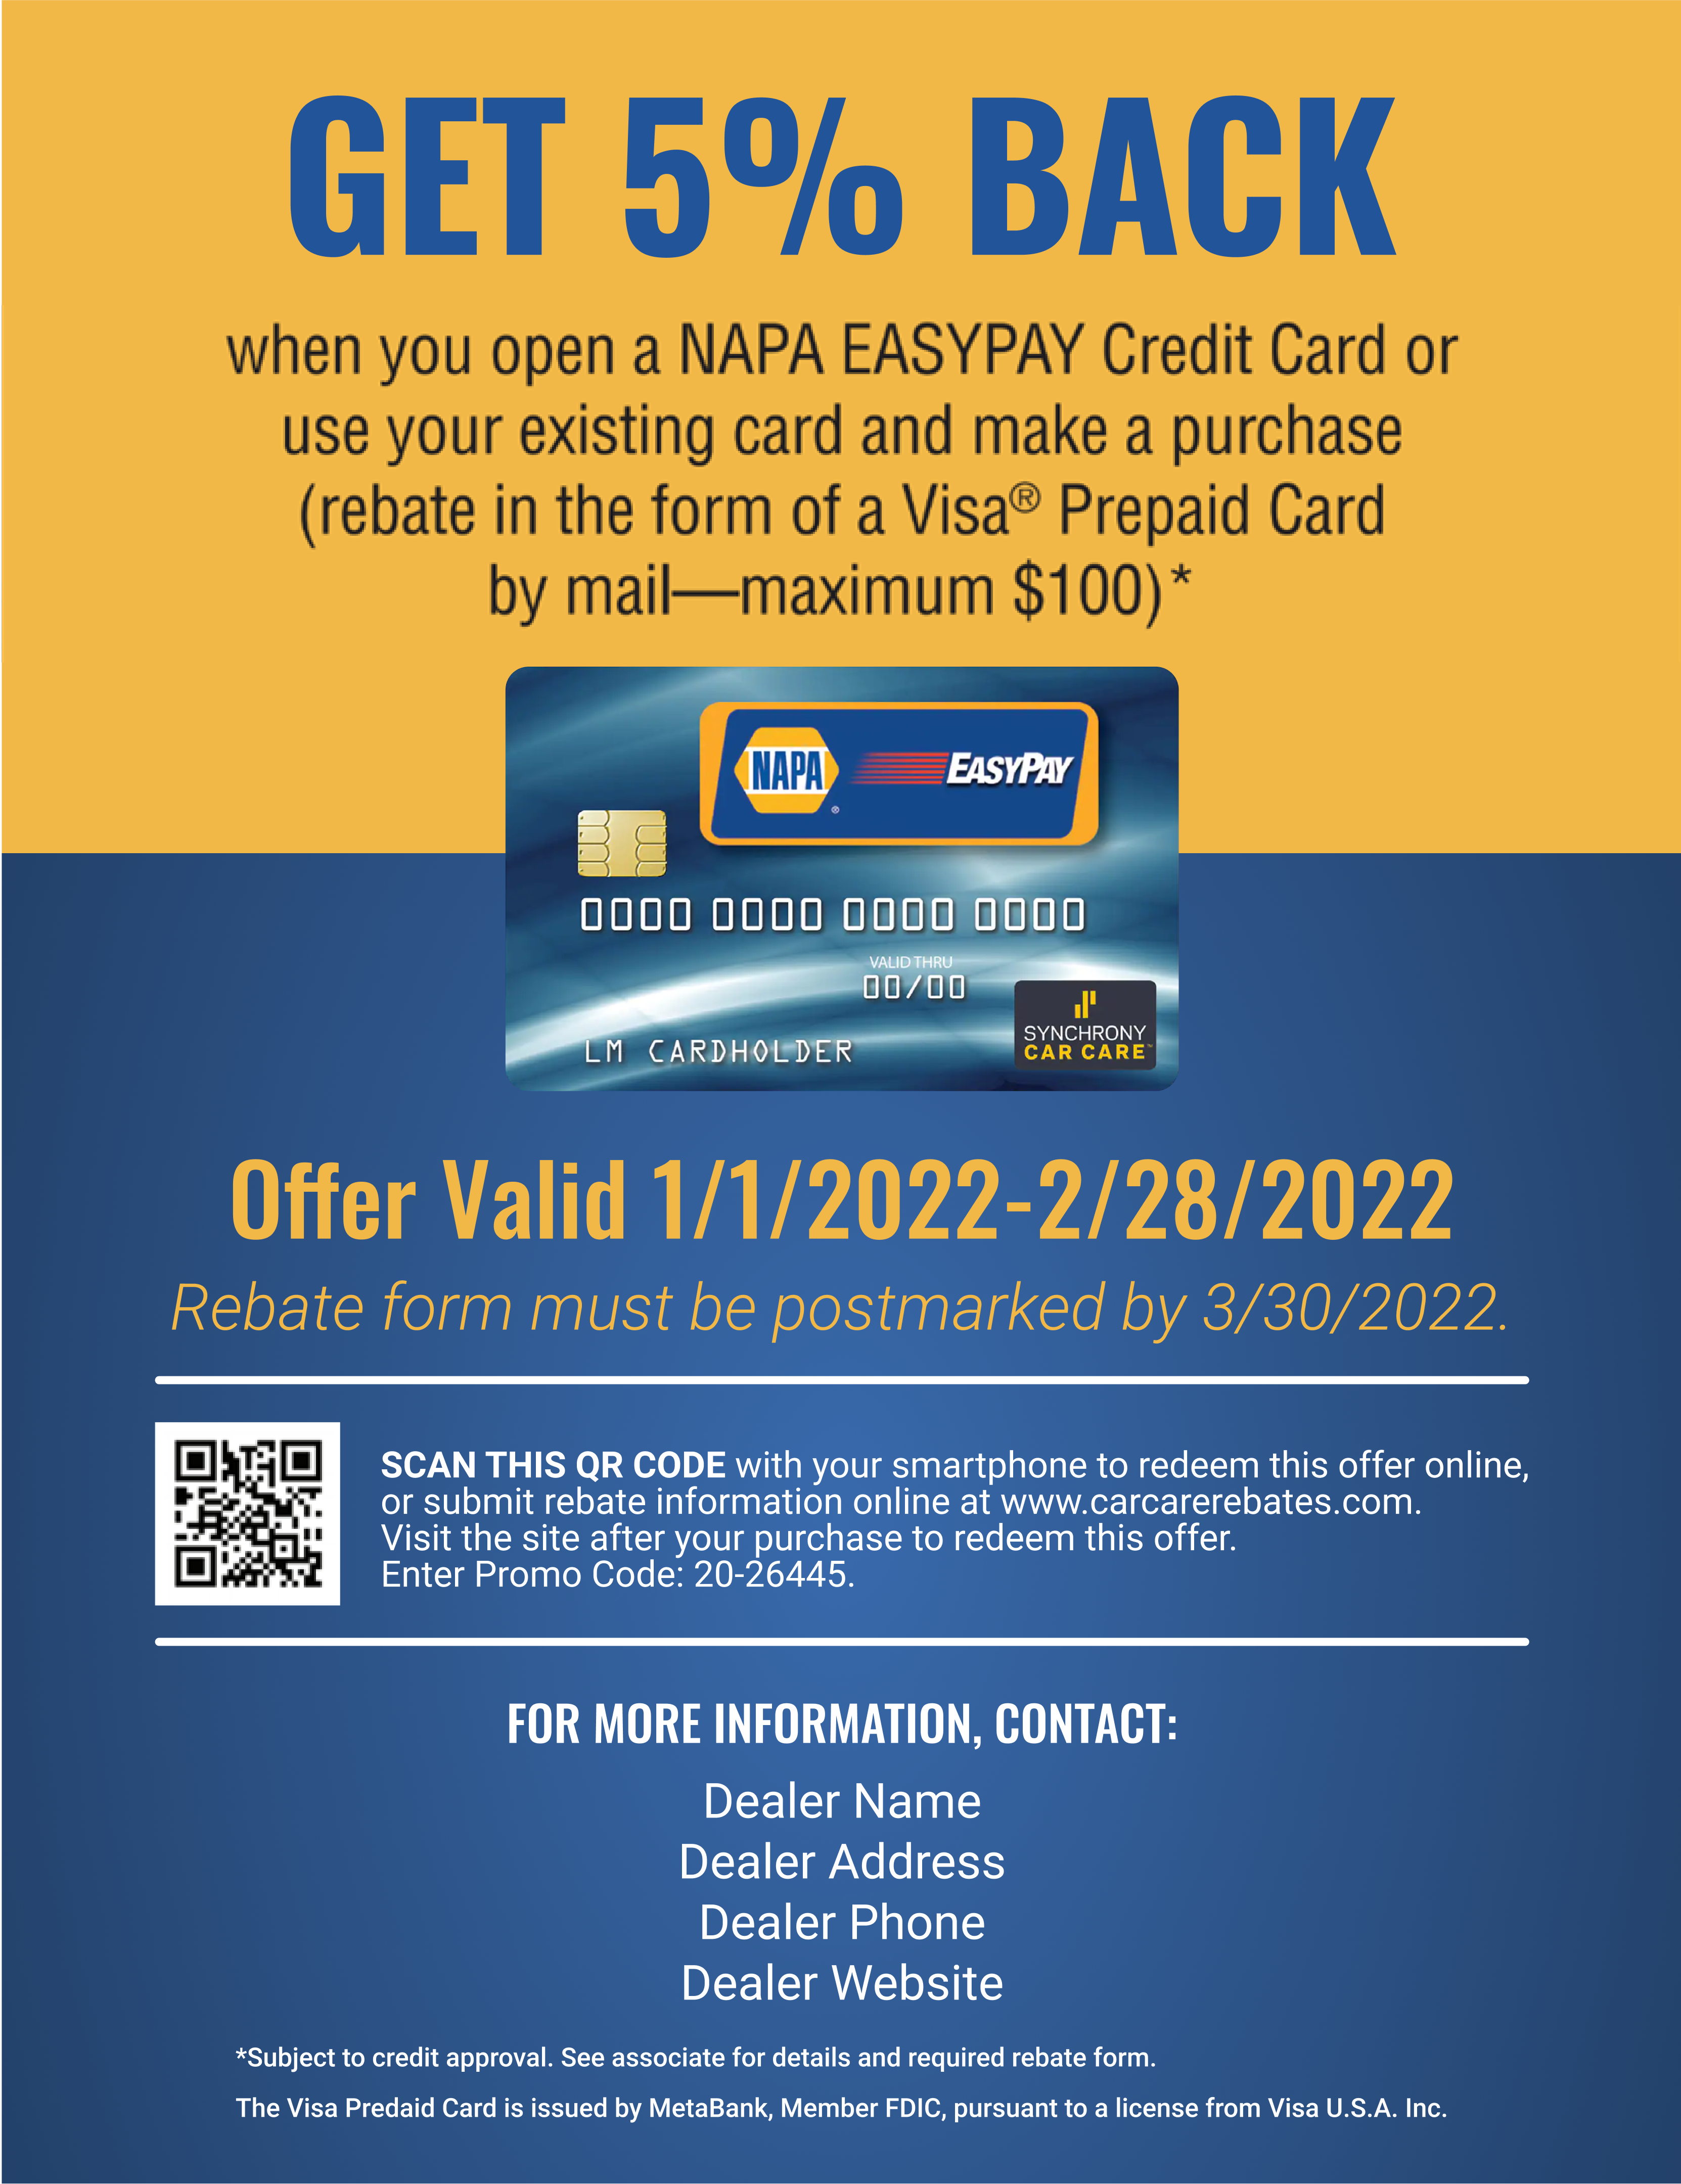 Get 5% Back with NAPA EasyPay 